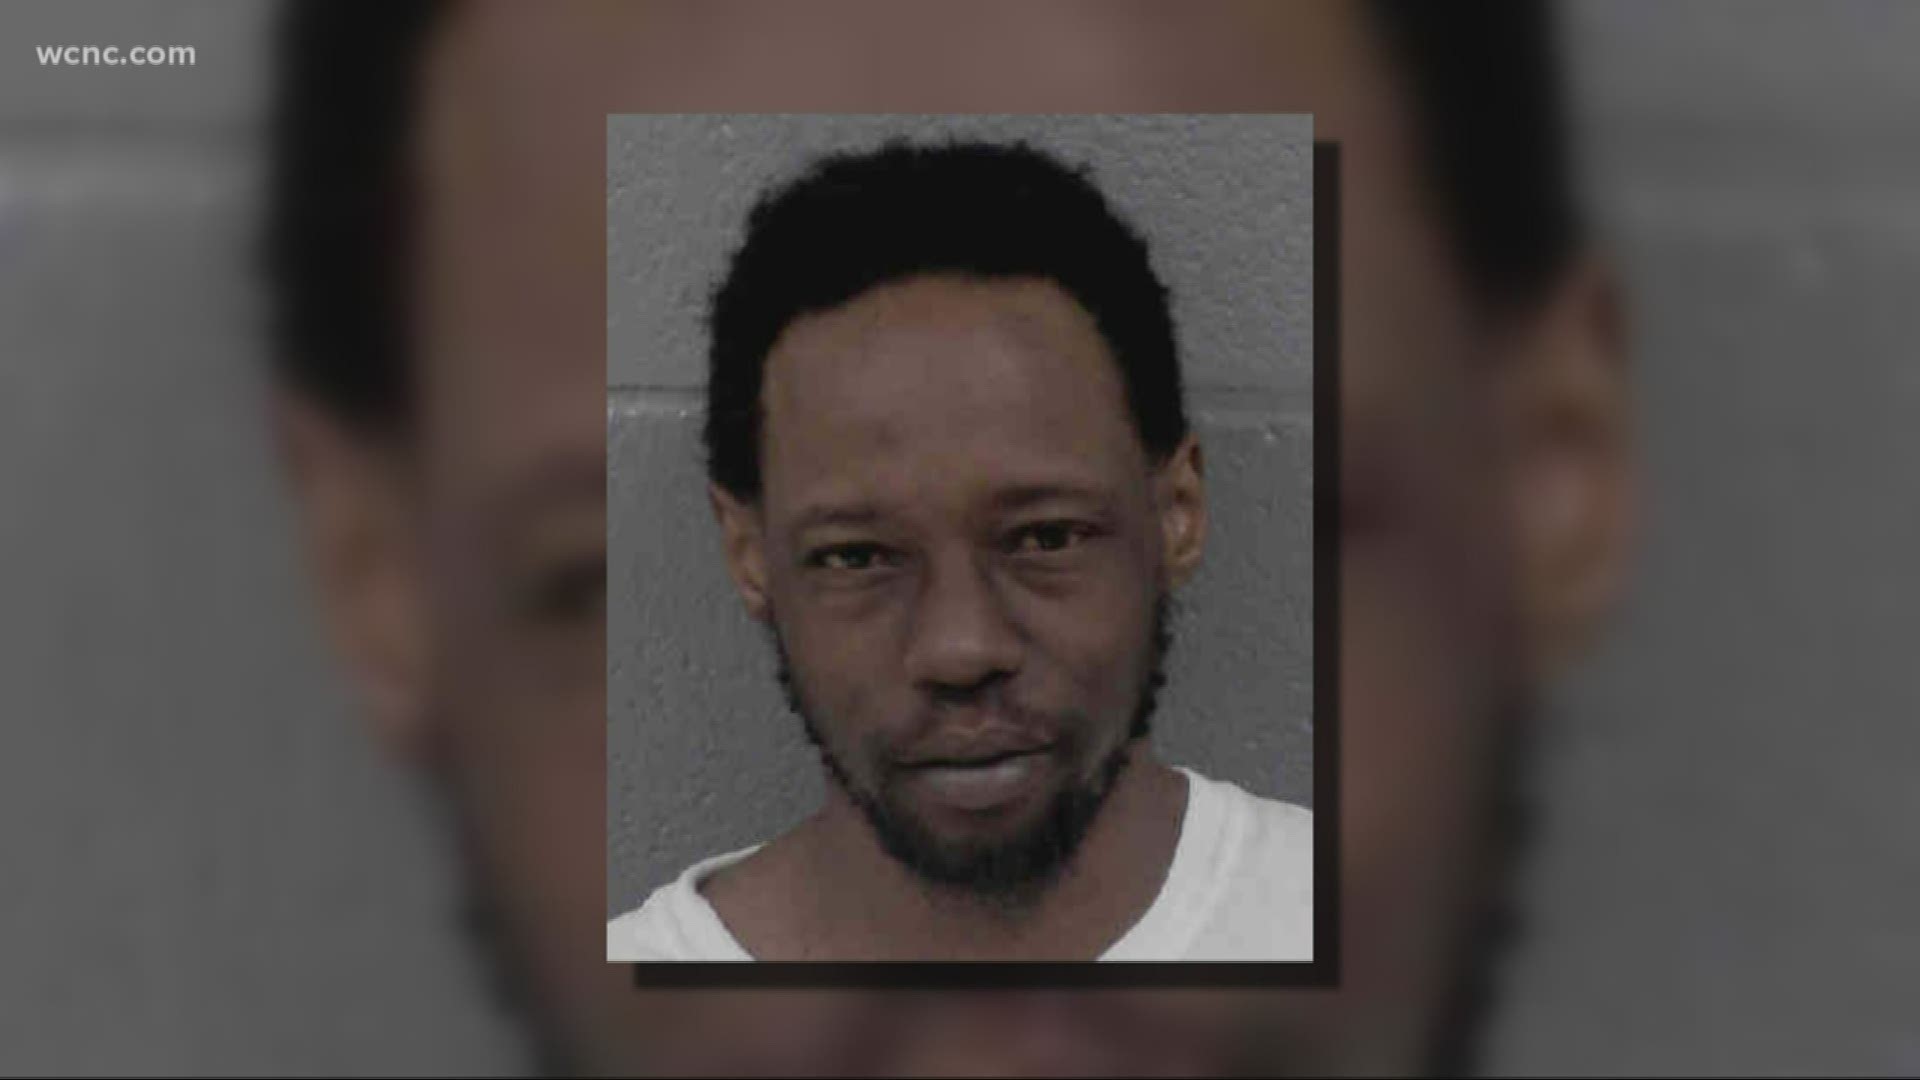 The man has been arrested at least 15 times in the last three years. His most recent arrest was Tuesday, just hours after a WCNC crew came face to face with him.